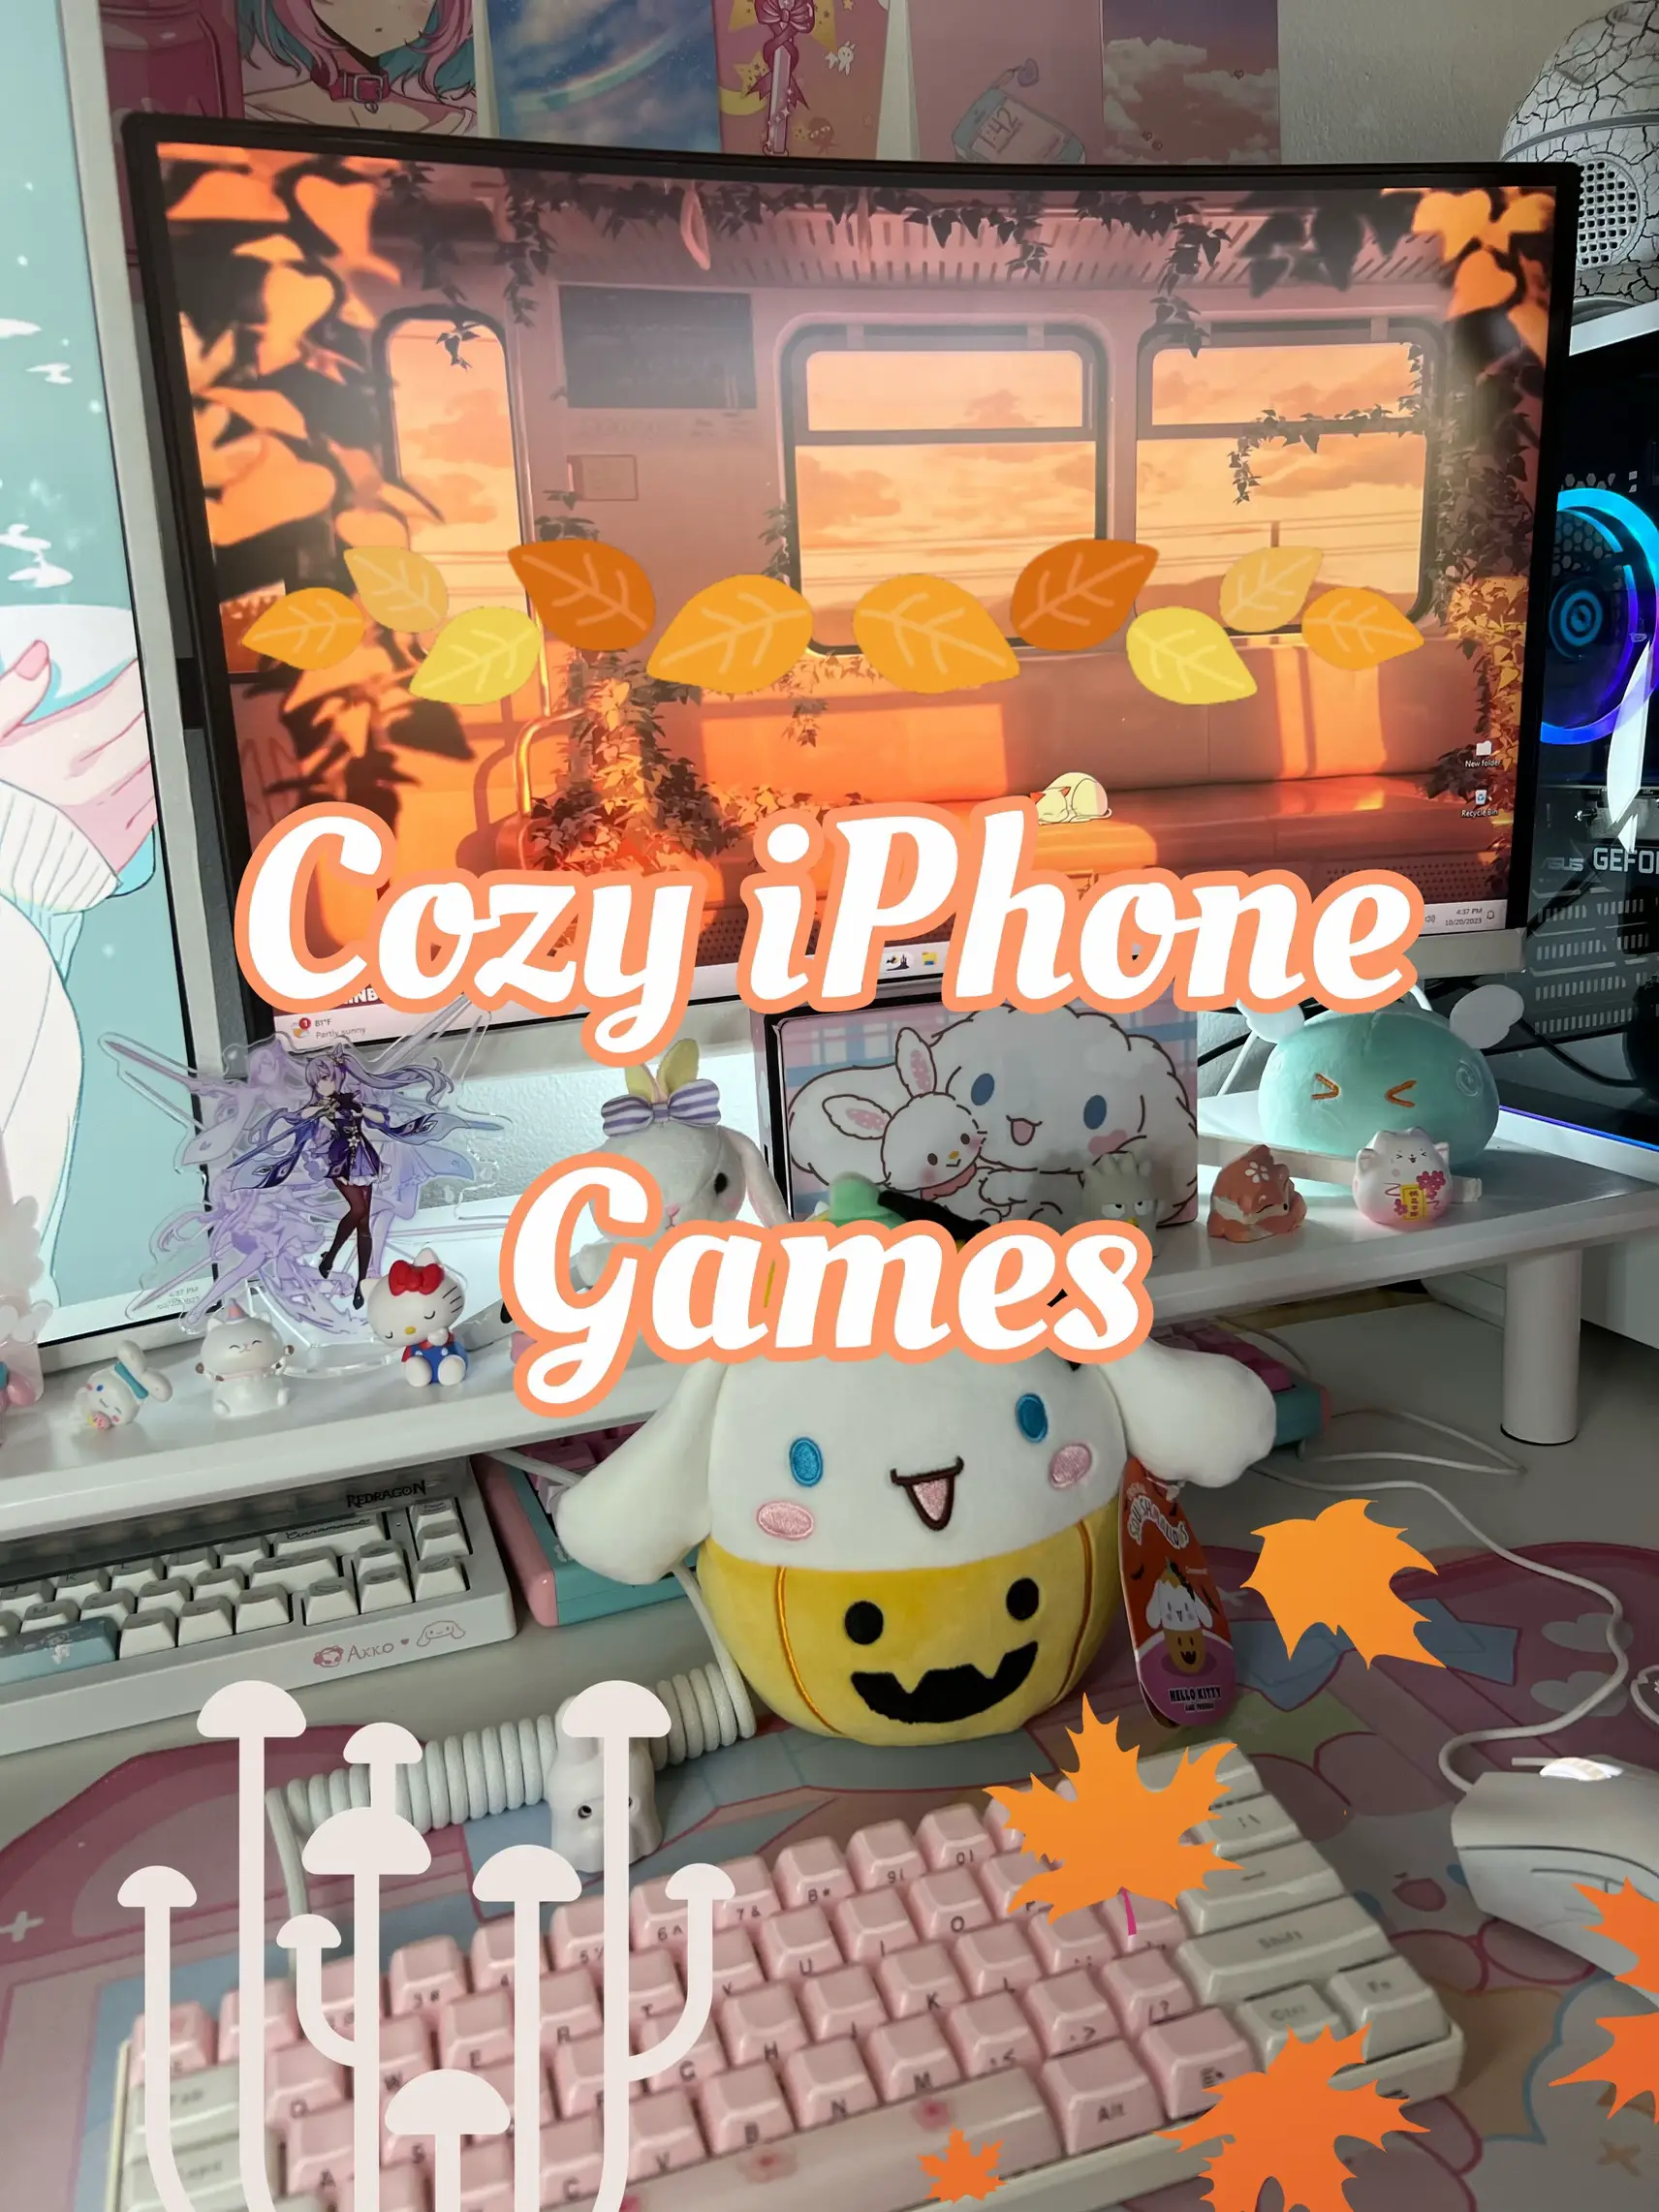 Preview: New 'Hello Kitty' brings 'Animal Crossing' vibes to Apple